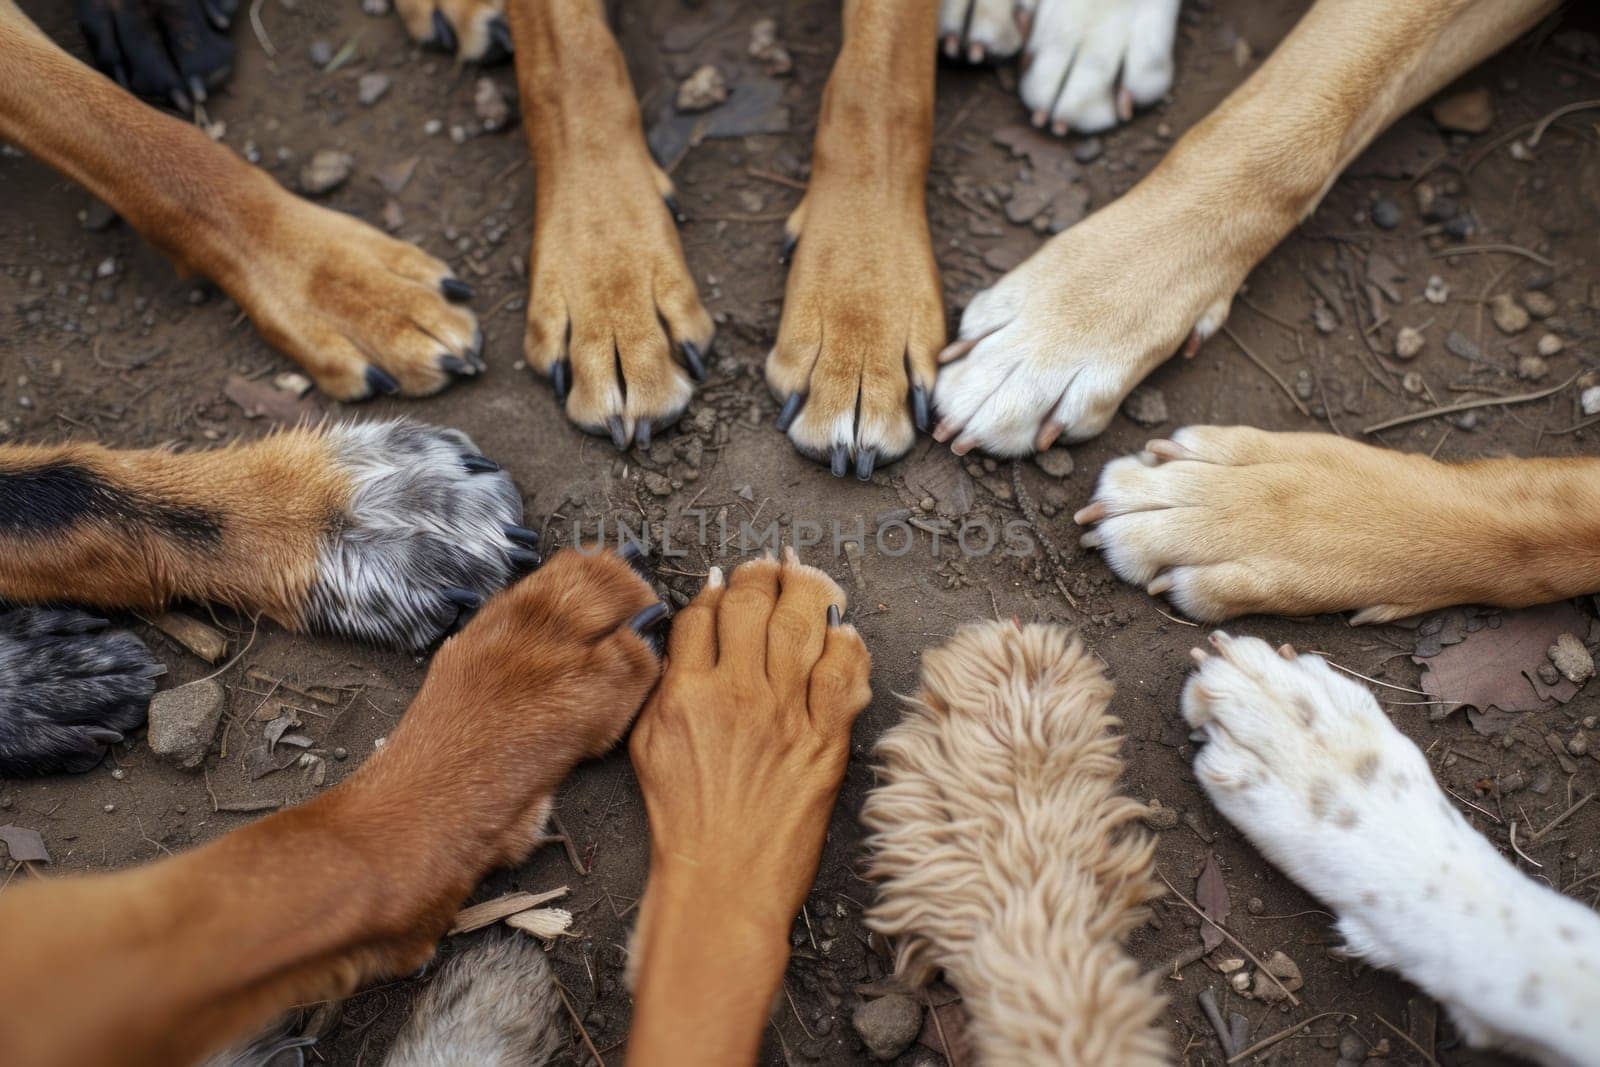 A photo of the paws of several dogs in the center, symbolizing teamwork.